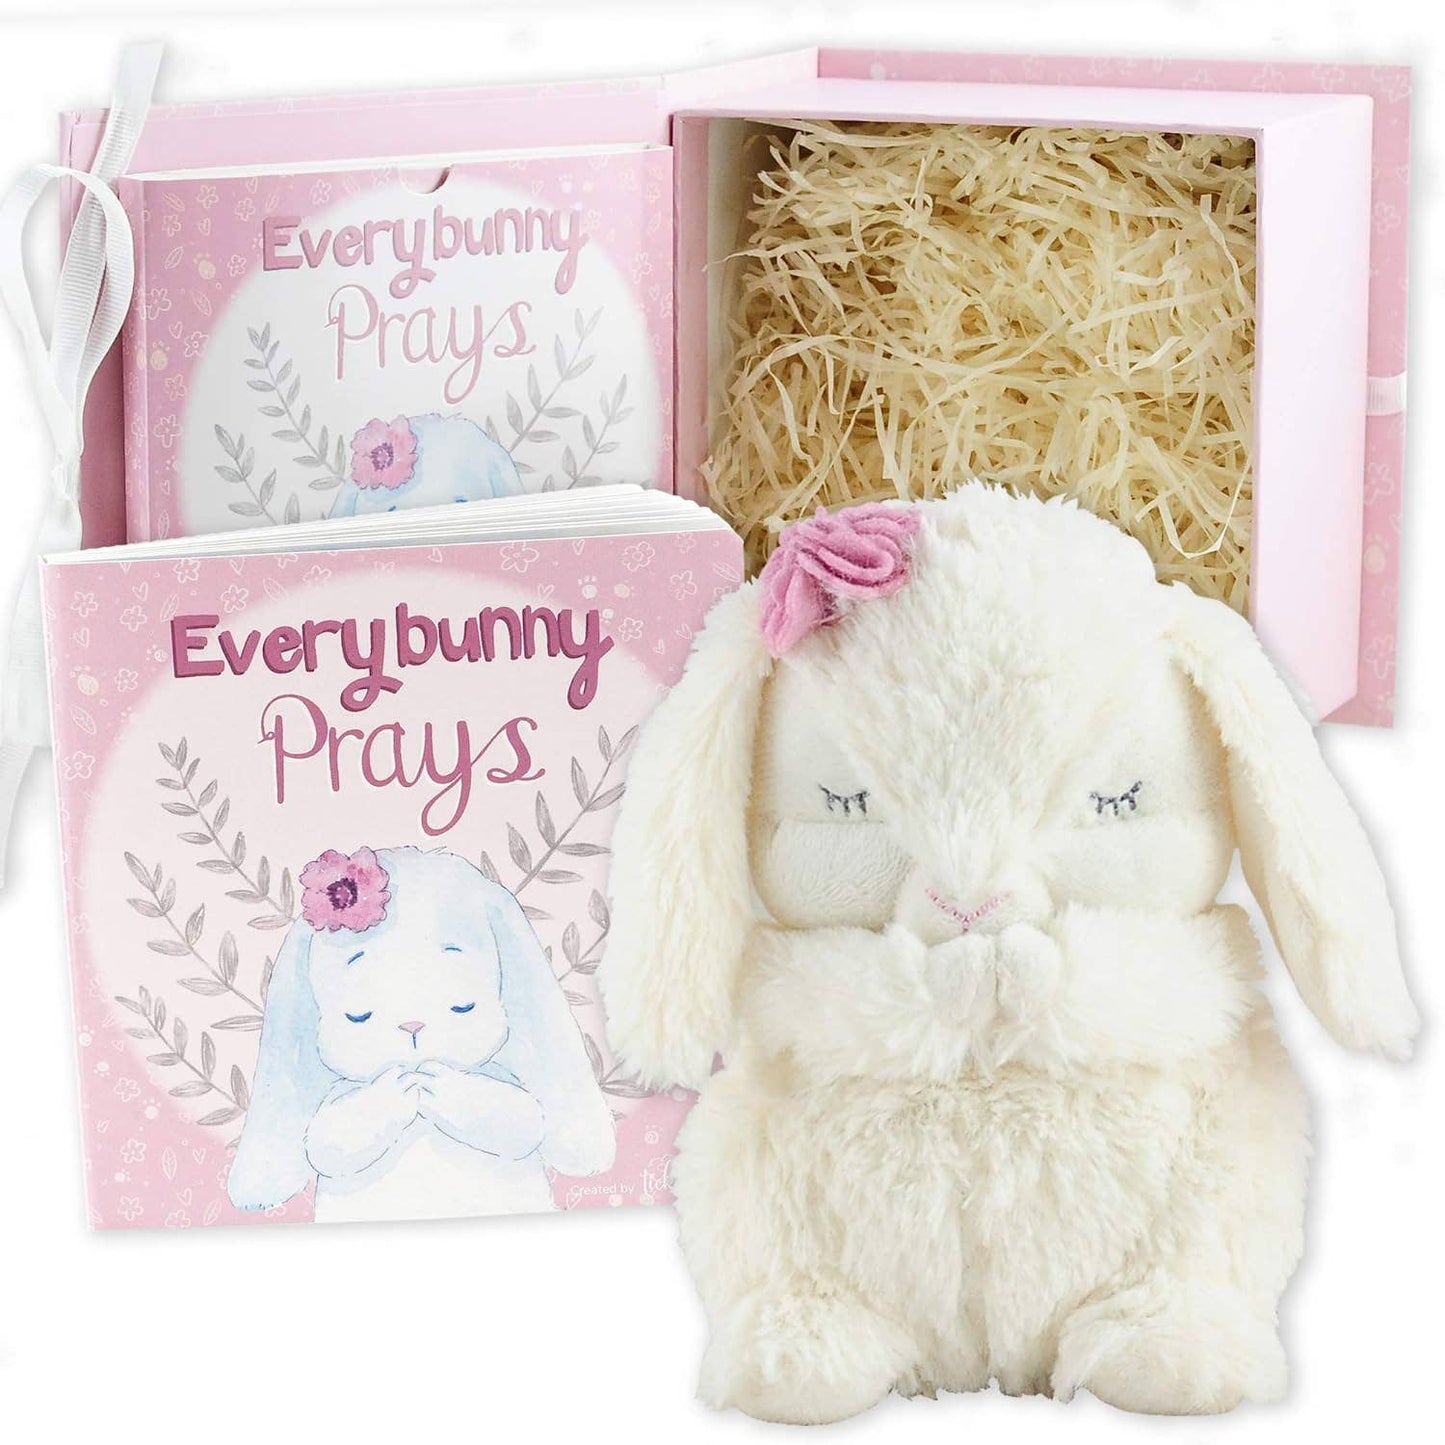 Everybunny Prays Giftset w/Book and Bunny reciting prayer